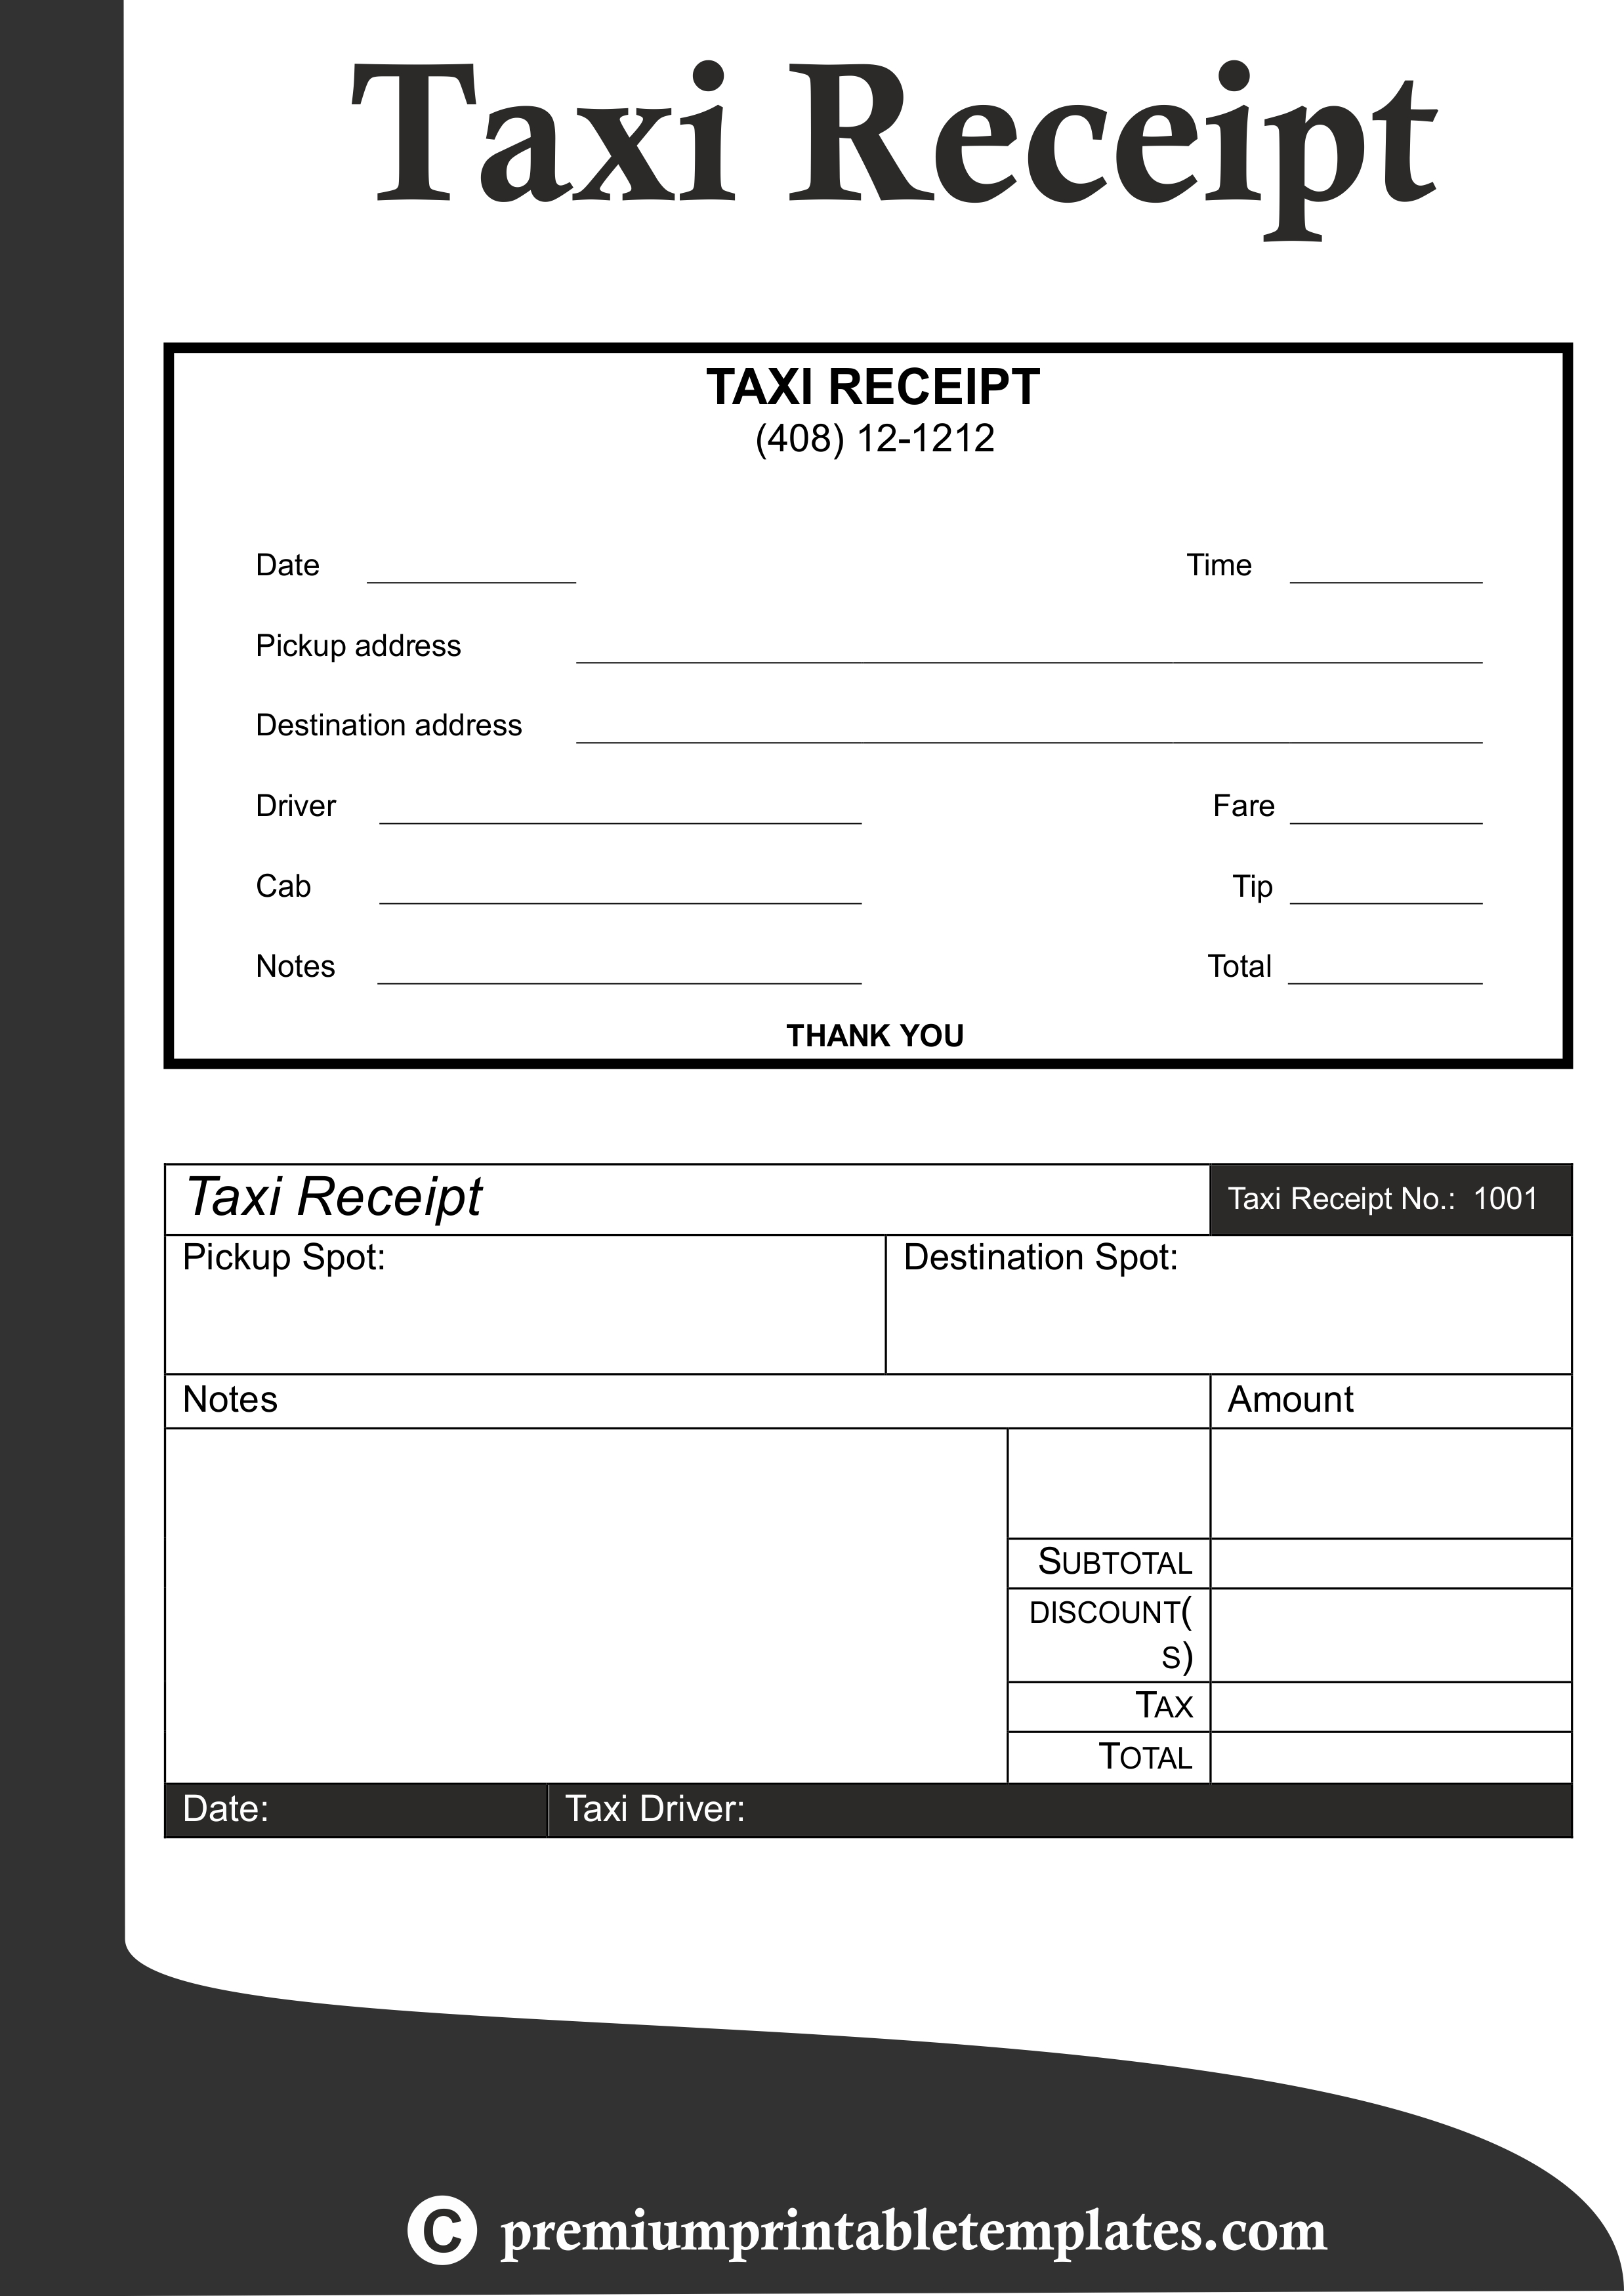 taxi receipt template receipt template business plan bill invoice for taxi